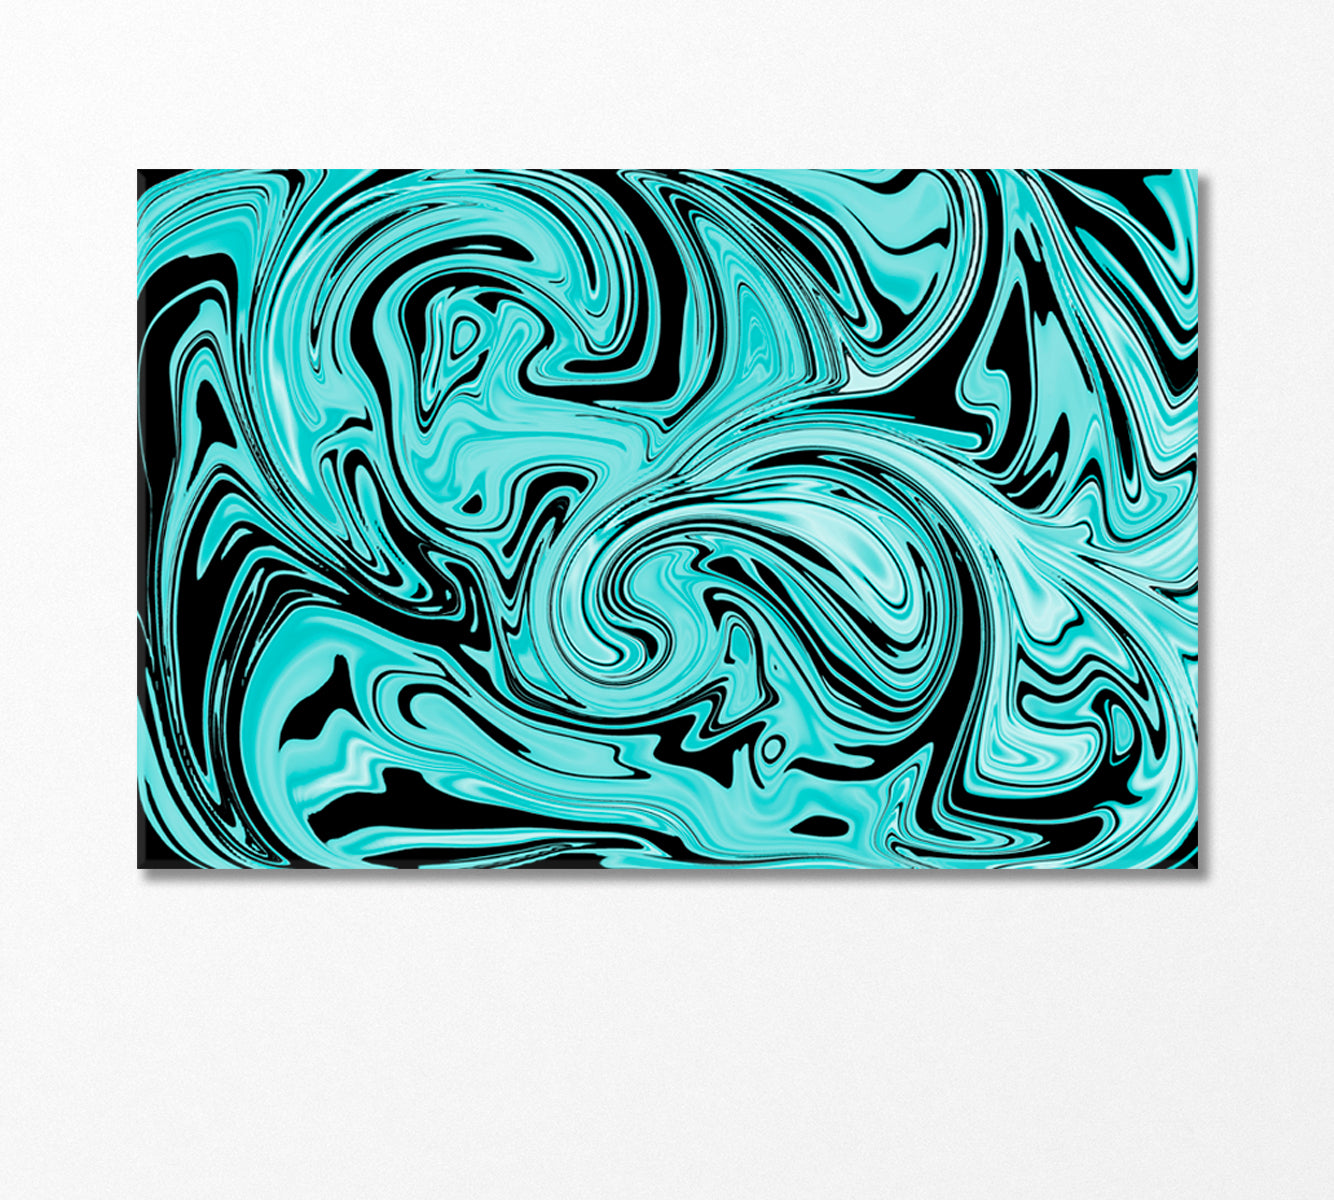 Abstract Blue and Marble Swirls Canvas Print-Canvas Print-CetArt-1 Panel-24x16 inches-CetArt